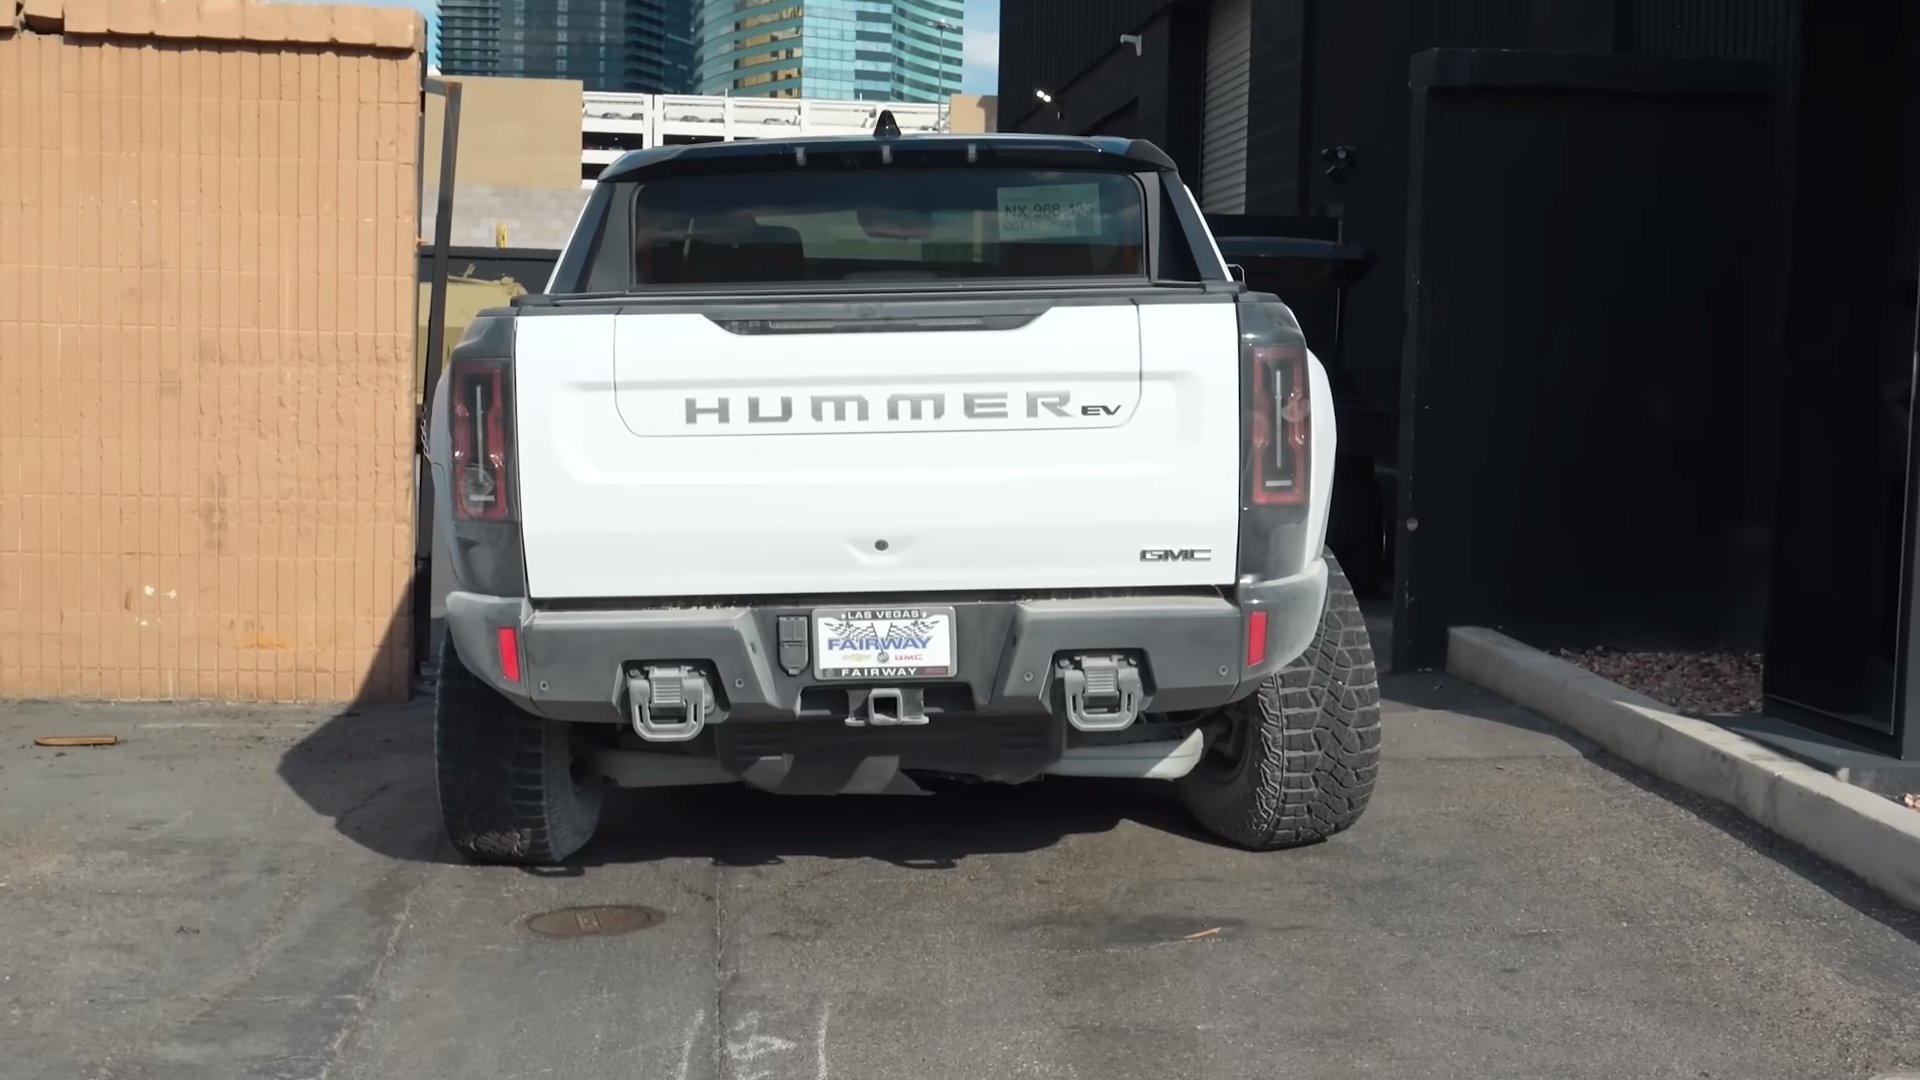 watch youtuber totals brand new gmc hummer ev the first day he drives it 7